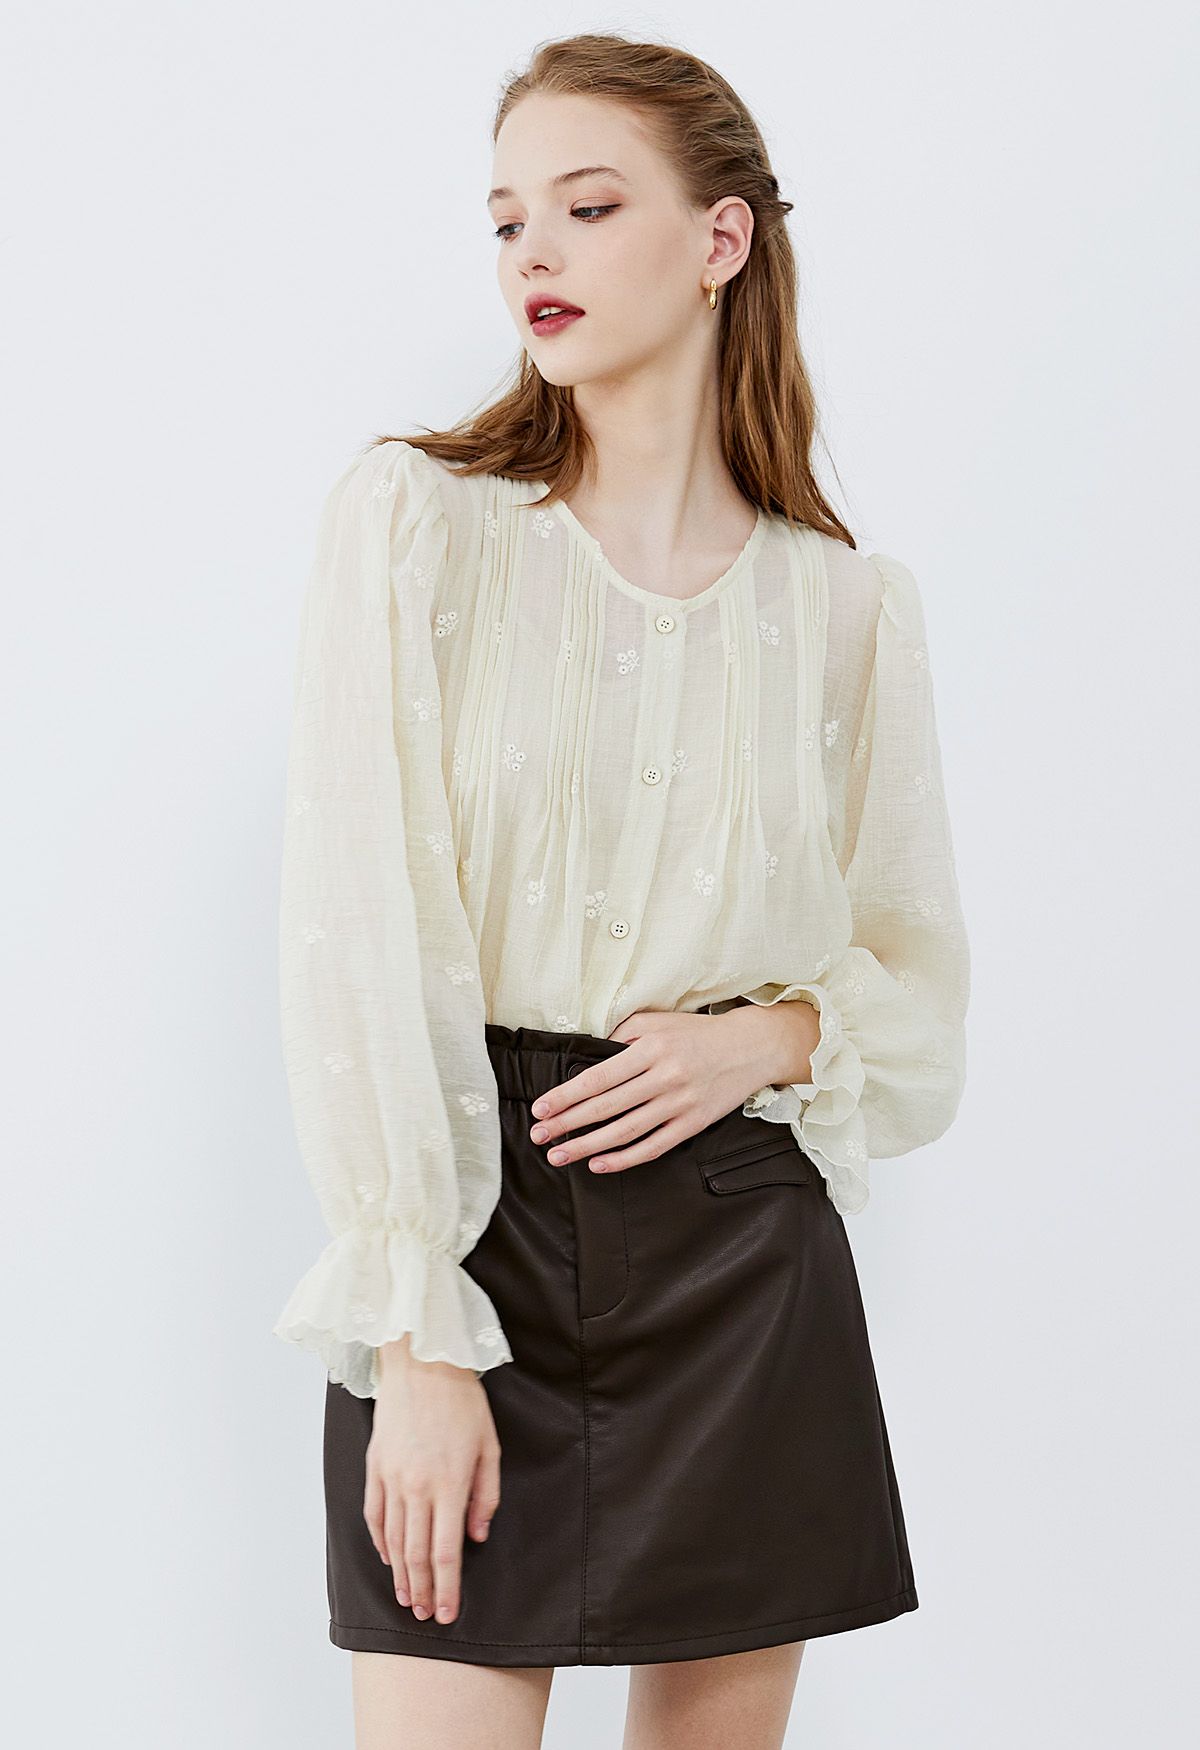 Embroidered Floret Pintuck Detail Dolly Top in Light Yellow